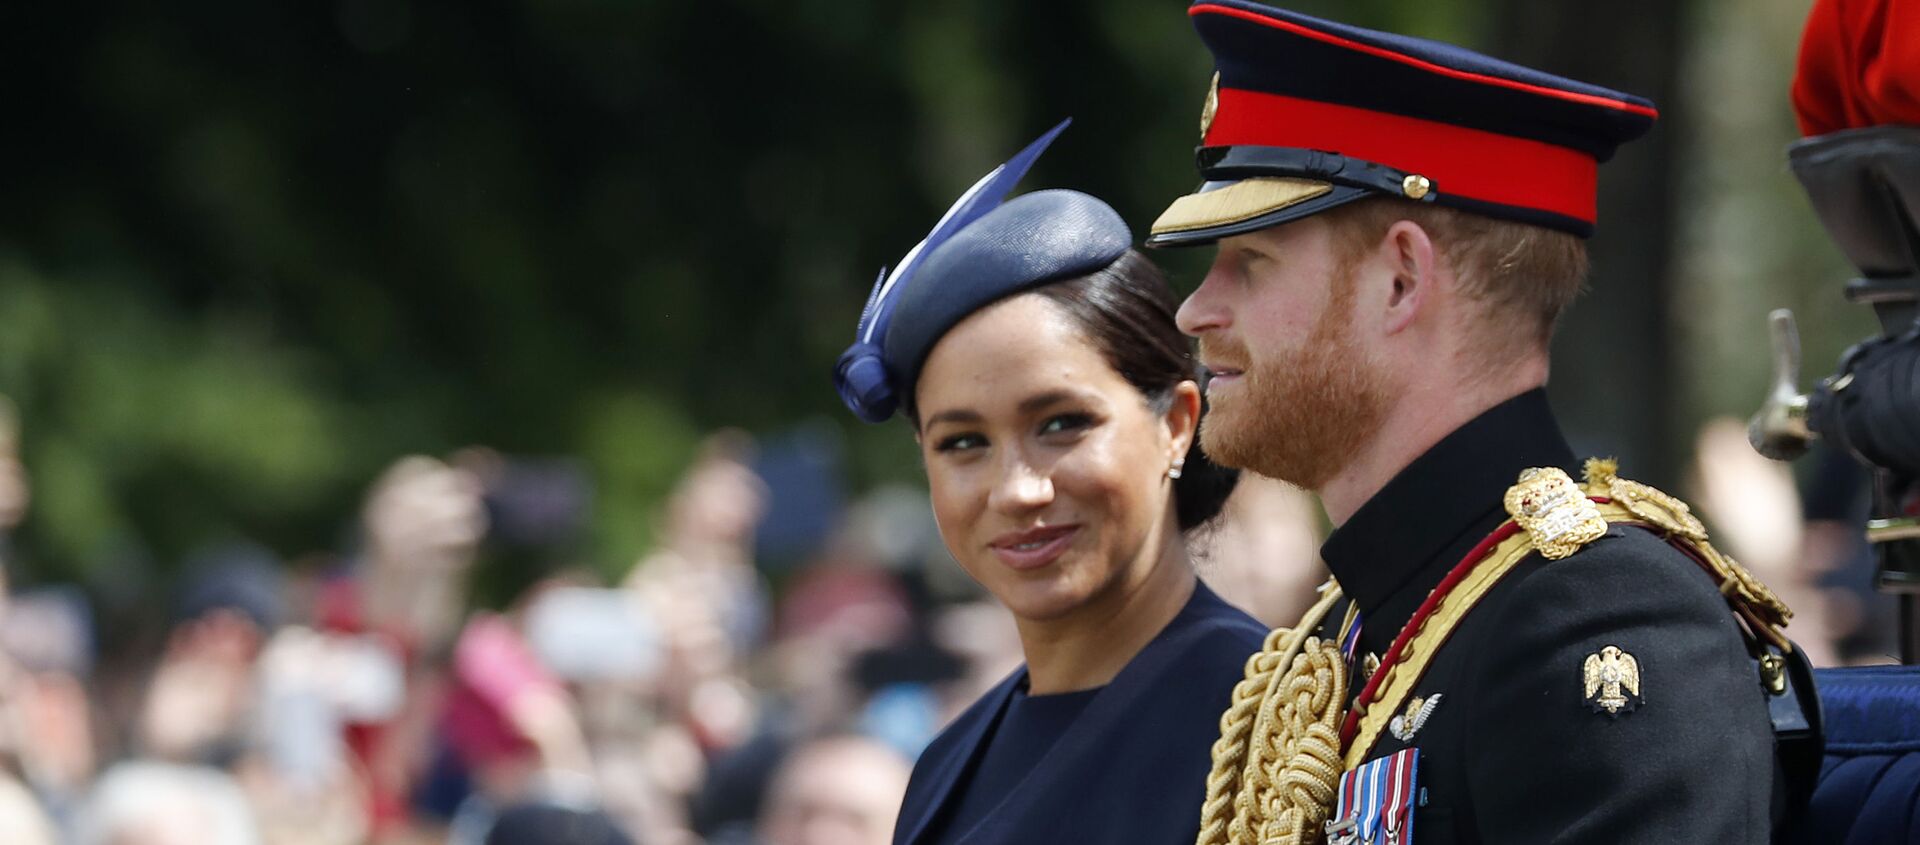 FILE - In this Saturday, June 8, 2019 file photo, Britain's Meghan, the Duchess of Sussex and Prince Harry ride in a carriage to attend the annual Trooping the Colour Ceremony in London - Sputnik International, 1920, 06.04.2021